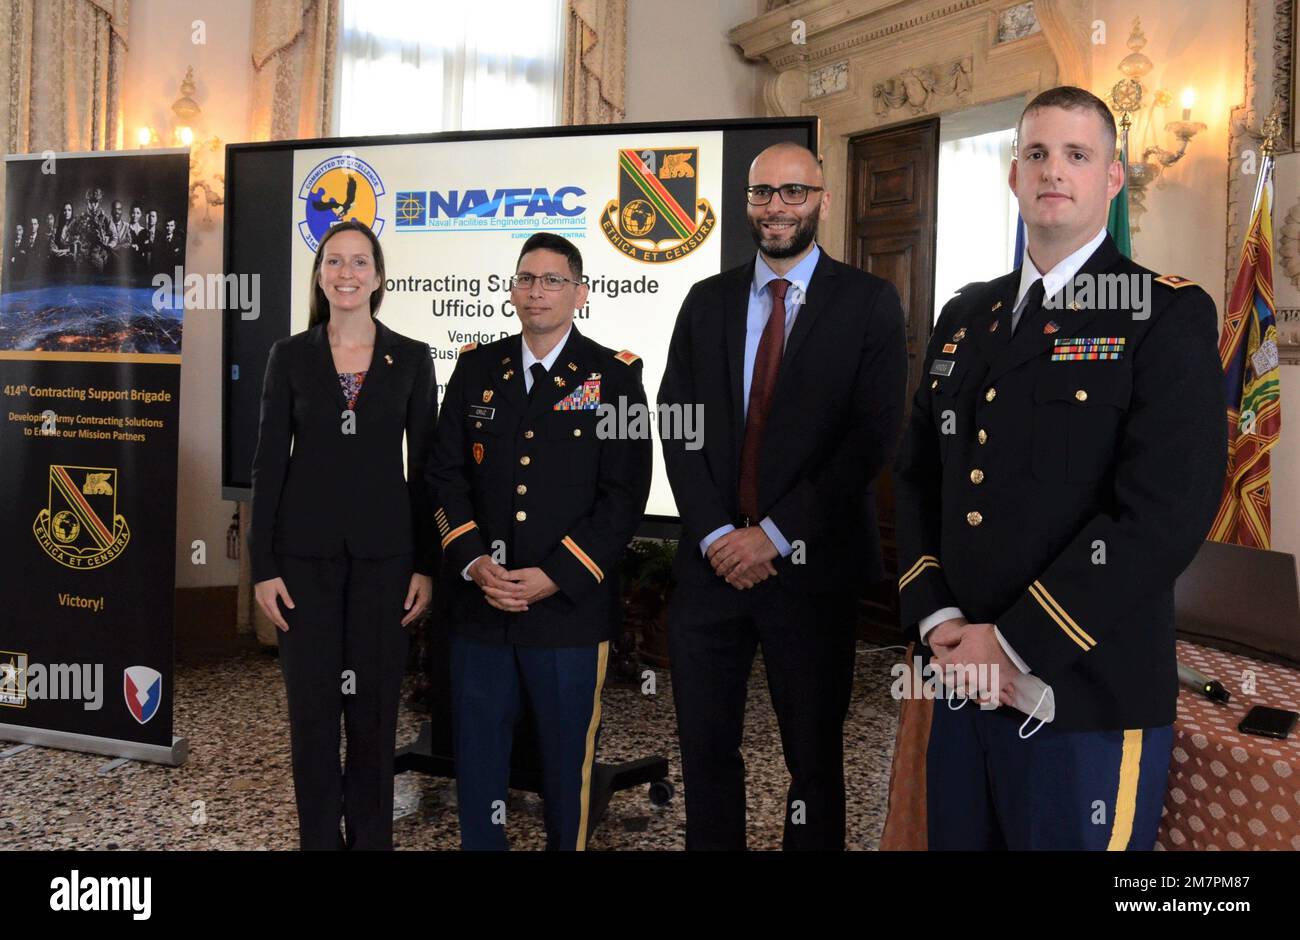 VICENZA, Italy - (From left to right)  Zoja Bazarnic, Political and Economic Chief at the U.S. Consulate in Milan, Col. Frankie Cruz, 414th Contracting Support Brigade commander, Silvio Giovine, Vicenza’s Councilor for Commerce and Industry and Maj. Matthew Kindig, 414th CSB pose for a picture during the Vendors Day May 11, 2022.    The event - held in the “Stucchi Room” of Palazzo Trissino, a 16th-century palace in downtown Vicenza that houses the town hall - was coordinated by Vicenza officials, with support from the 414th Contracting Support Brigade and U.S. Army Garrison Italy. Representat Stock Photo